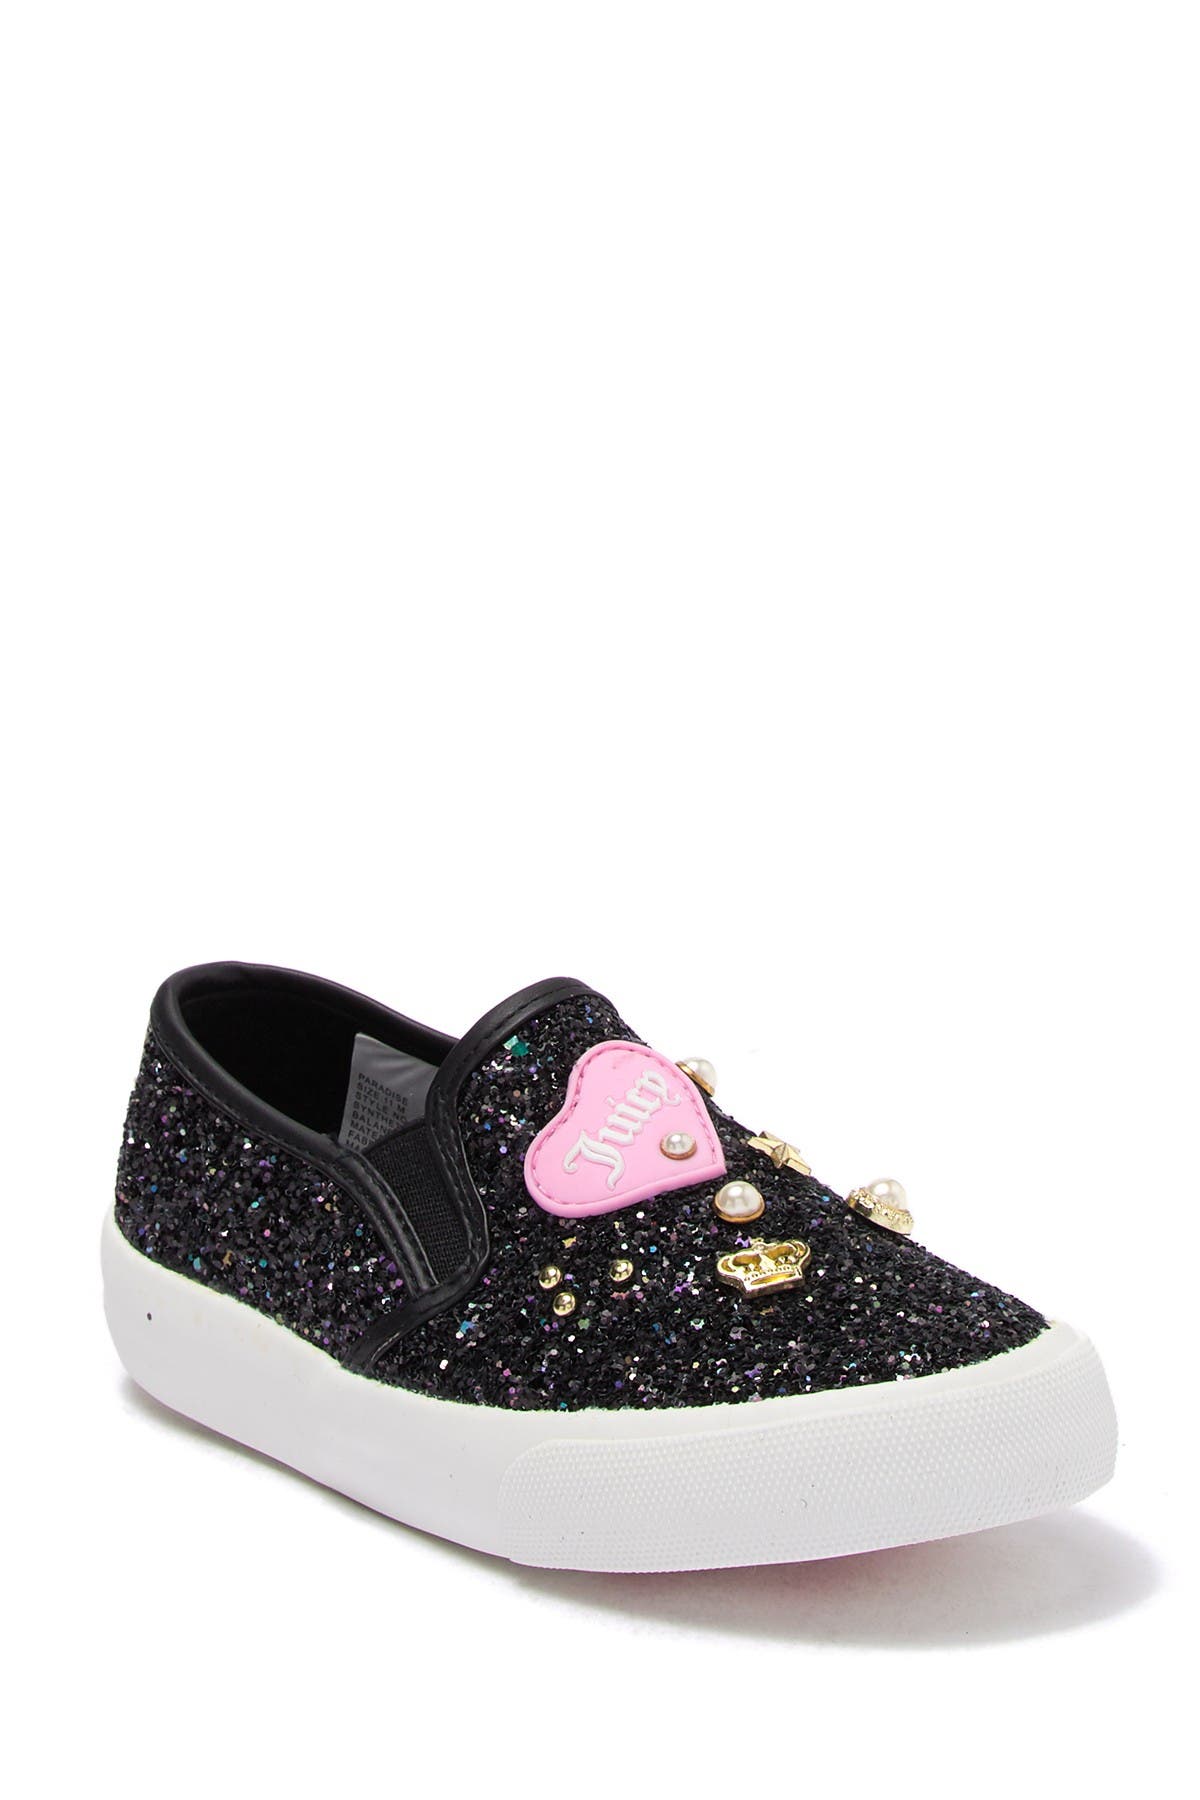 juicy couture slip on shoes